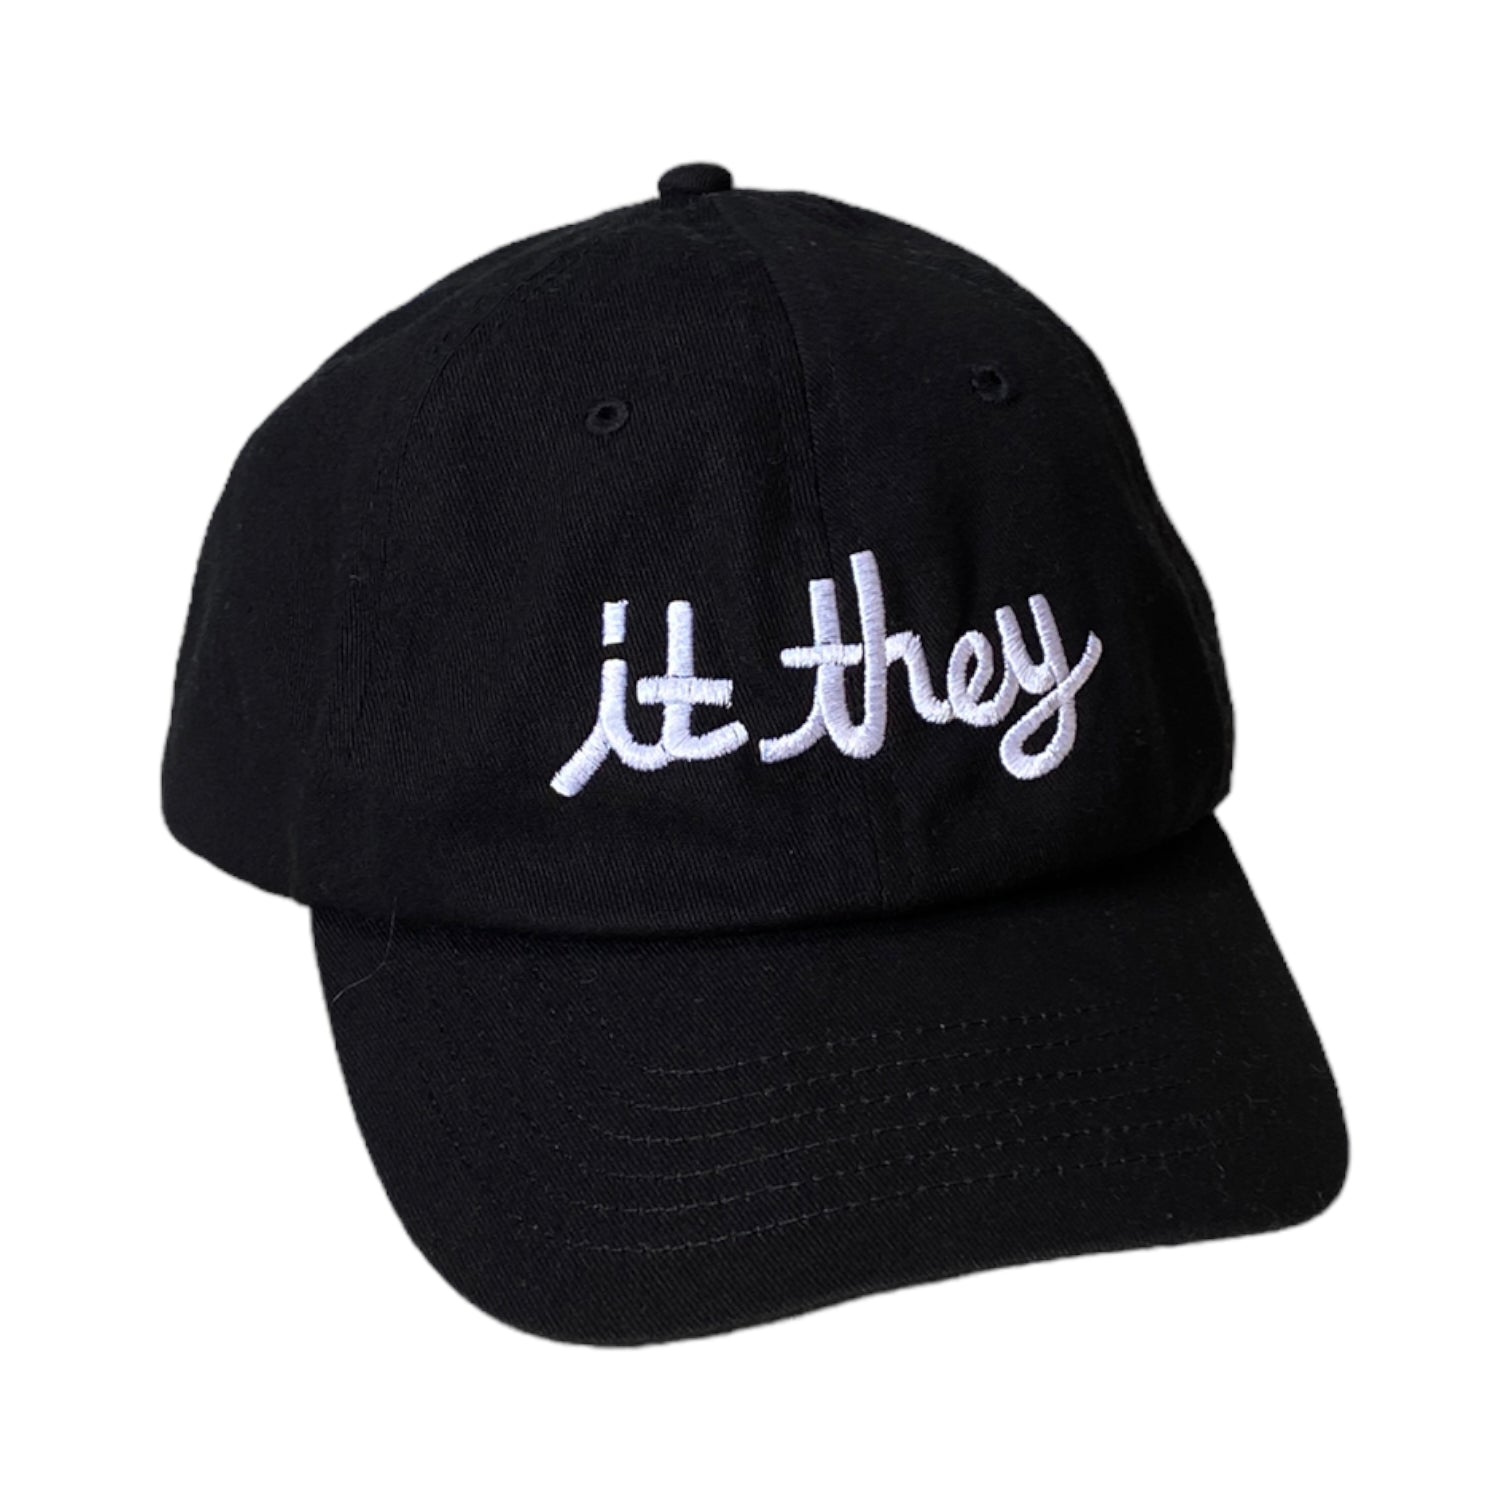 black baseball cap with white embroidery reading it they in cursive text across the front